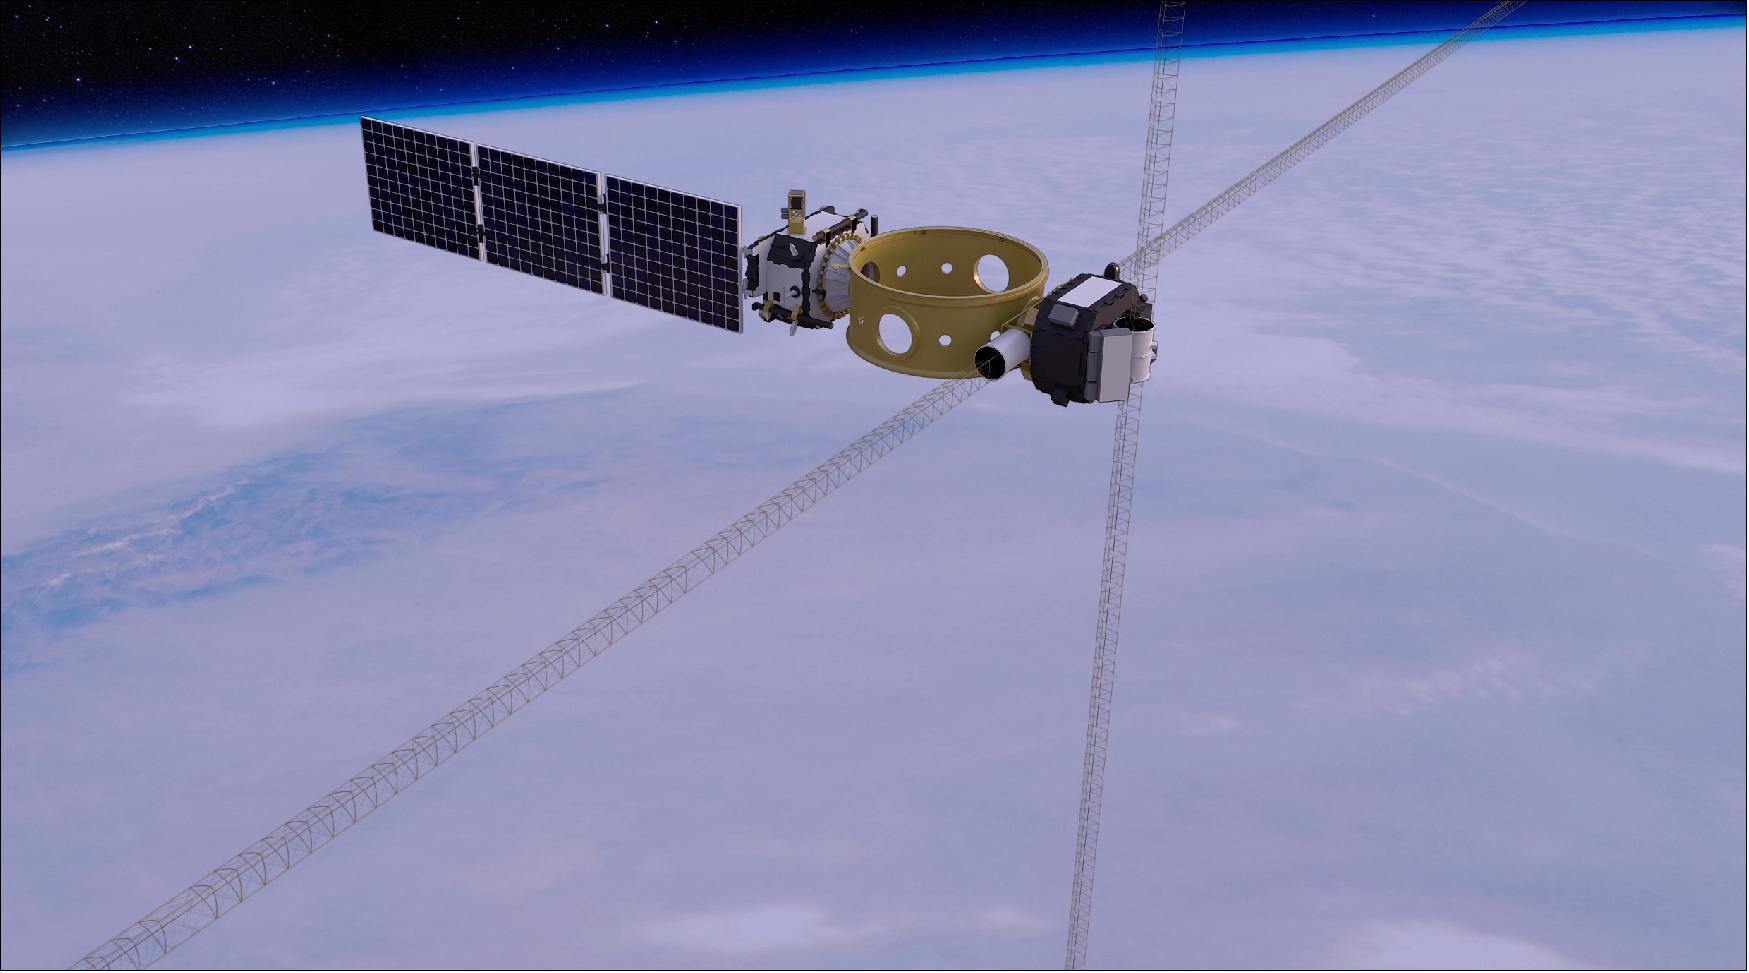 Figure 8: On 12 July 2019, the longer pair of the antenna booms (80 meters tip-to-tip) was successfully deployed as the largest unmanned structure ever in space (image credit: AFRL)